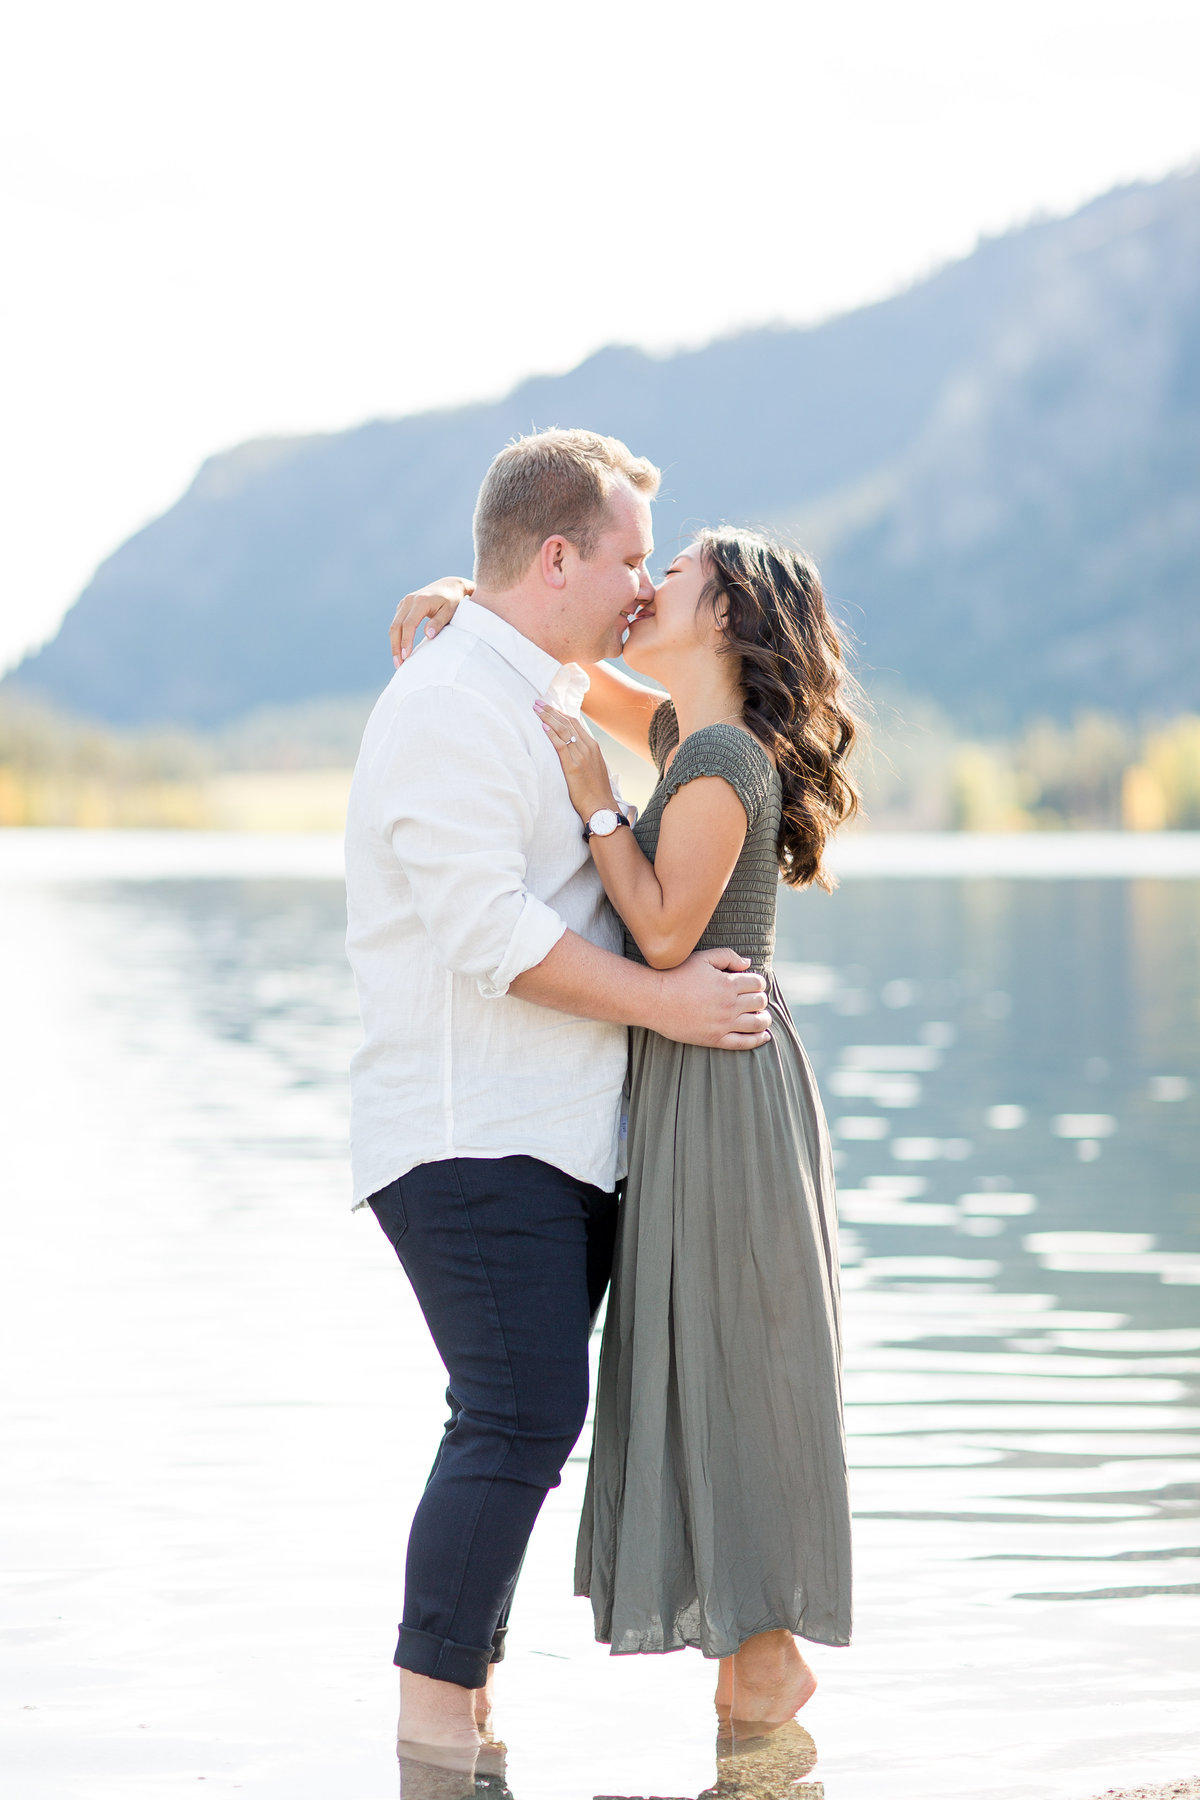 Kyle & Alisa | Previews | Emily Moller Photography  (3 of 14)